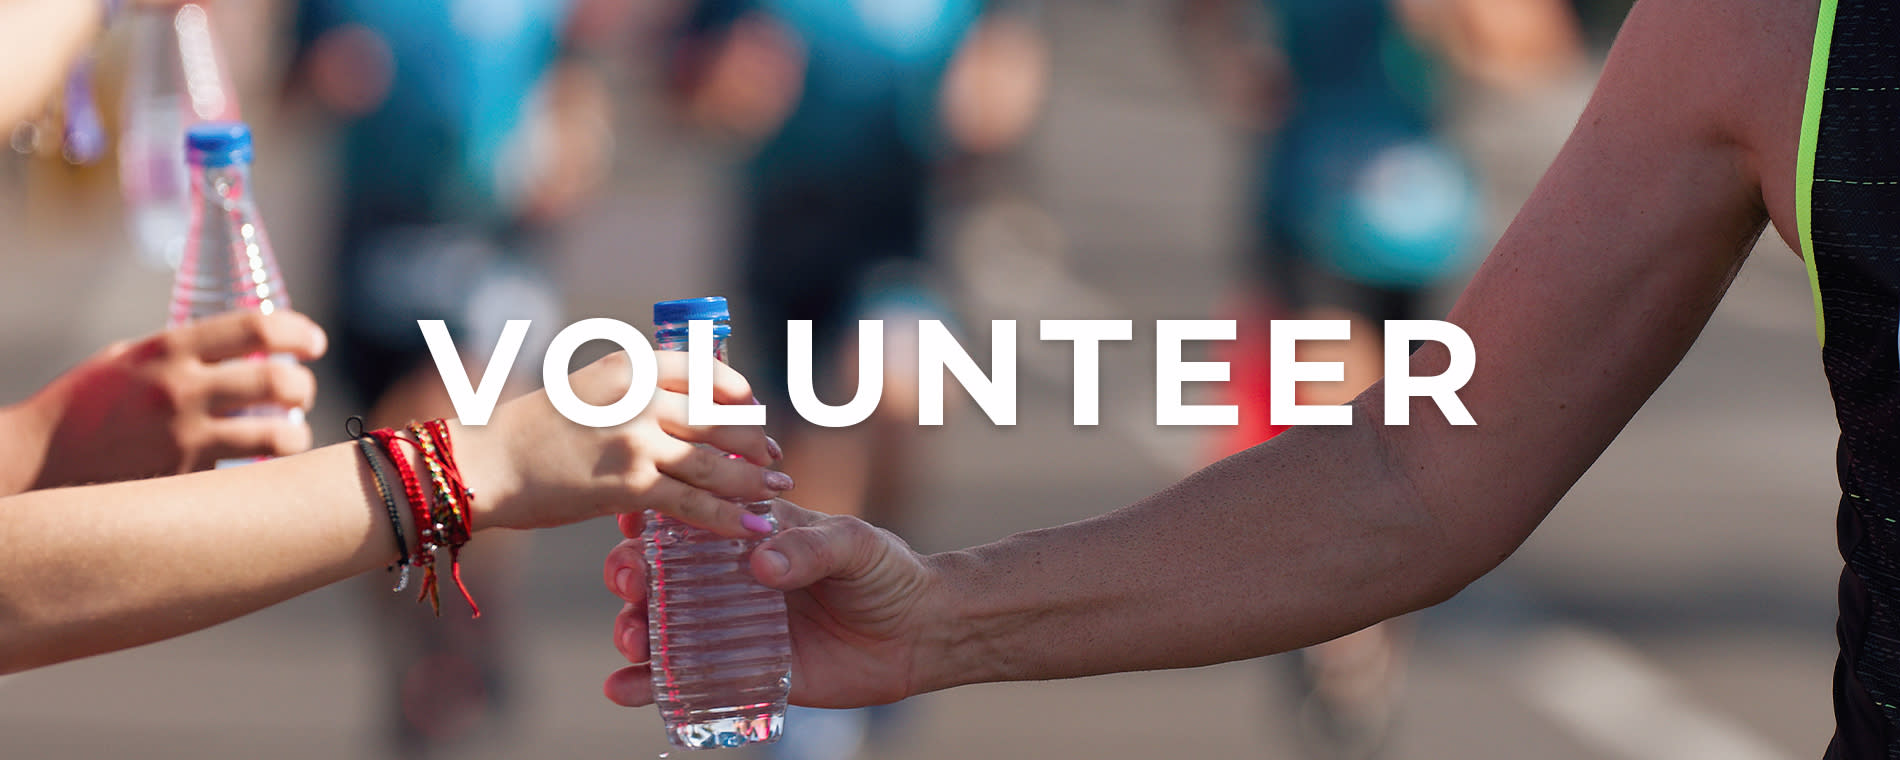 One person hands a water bottle to another with white "Volunteer" text over the image